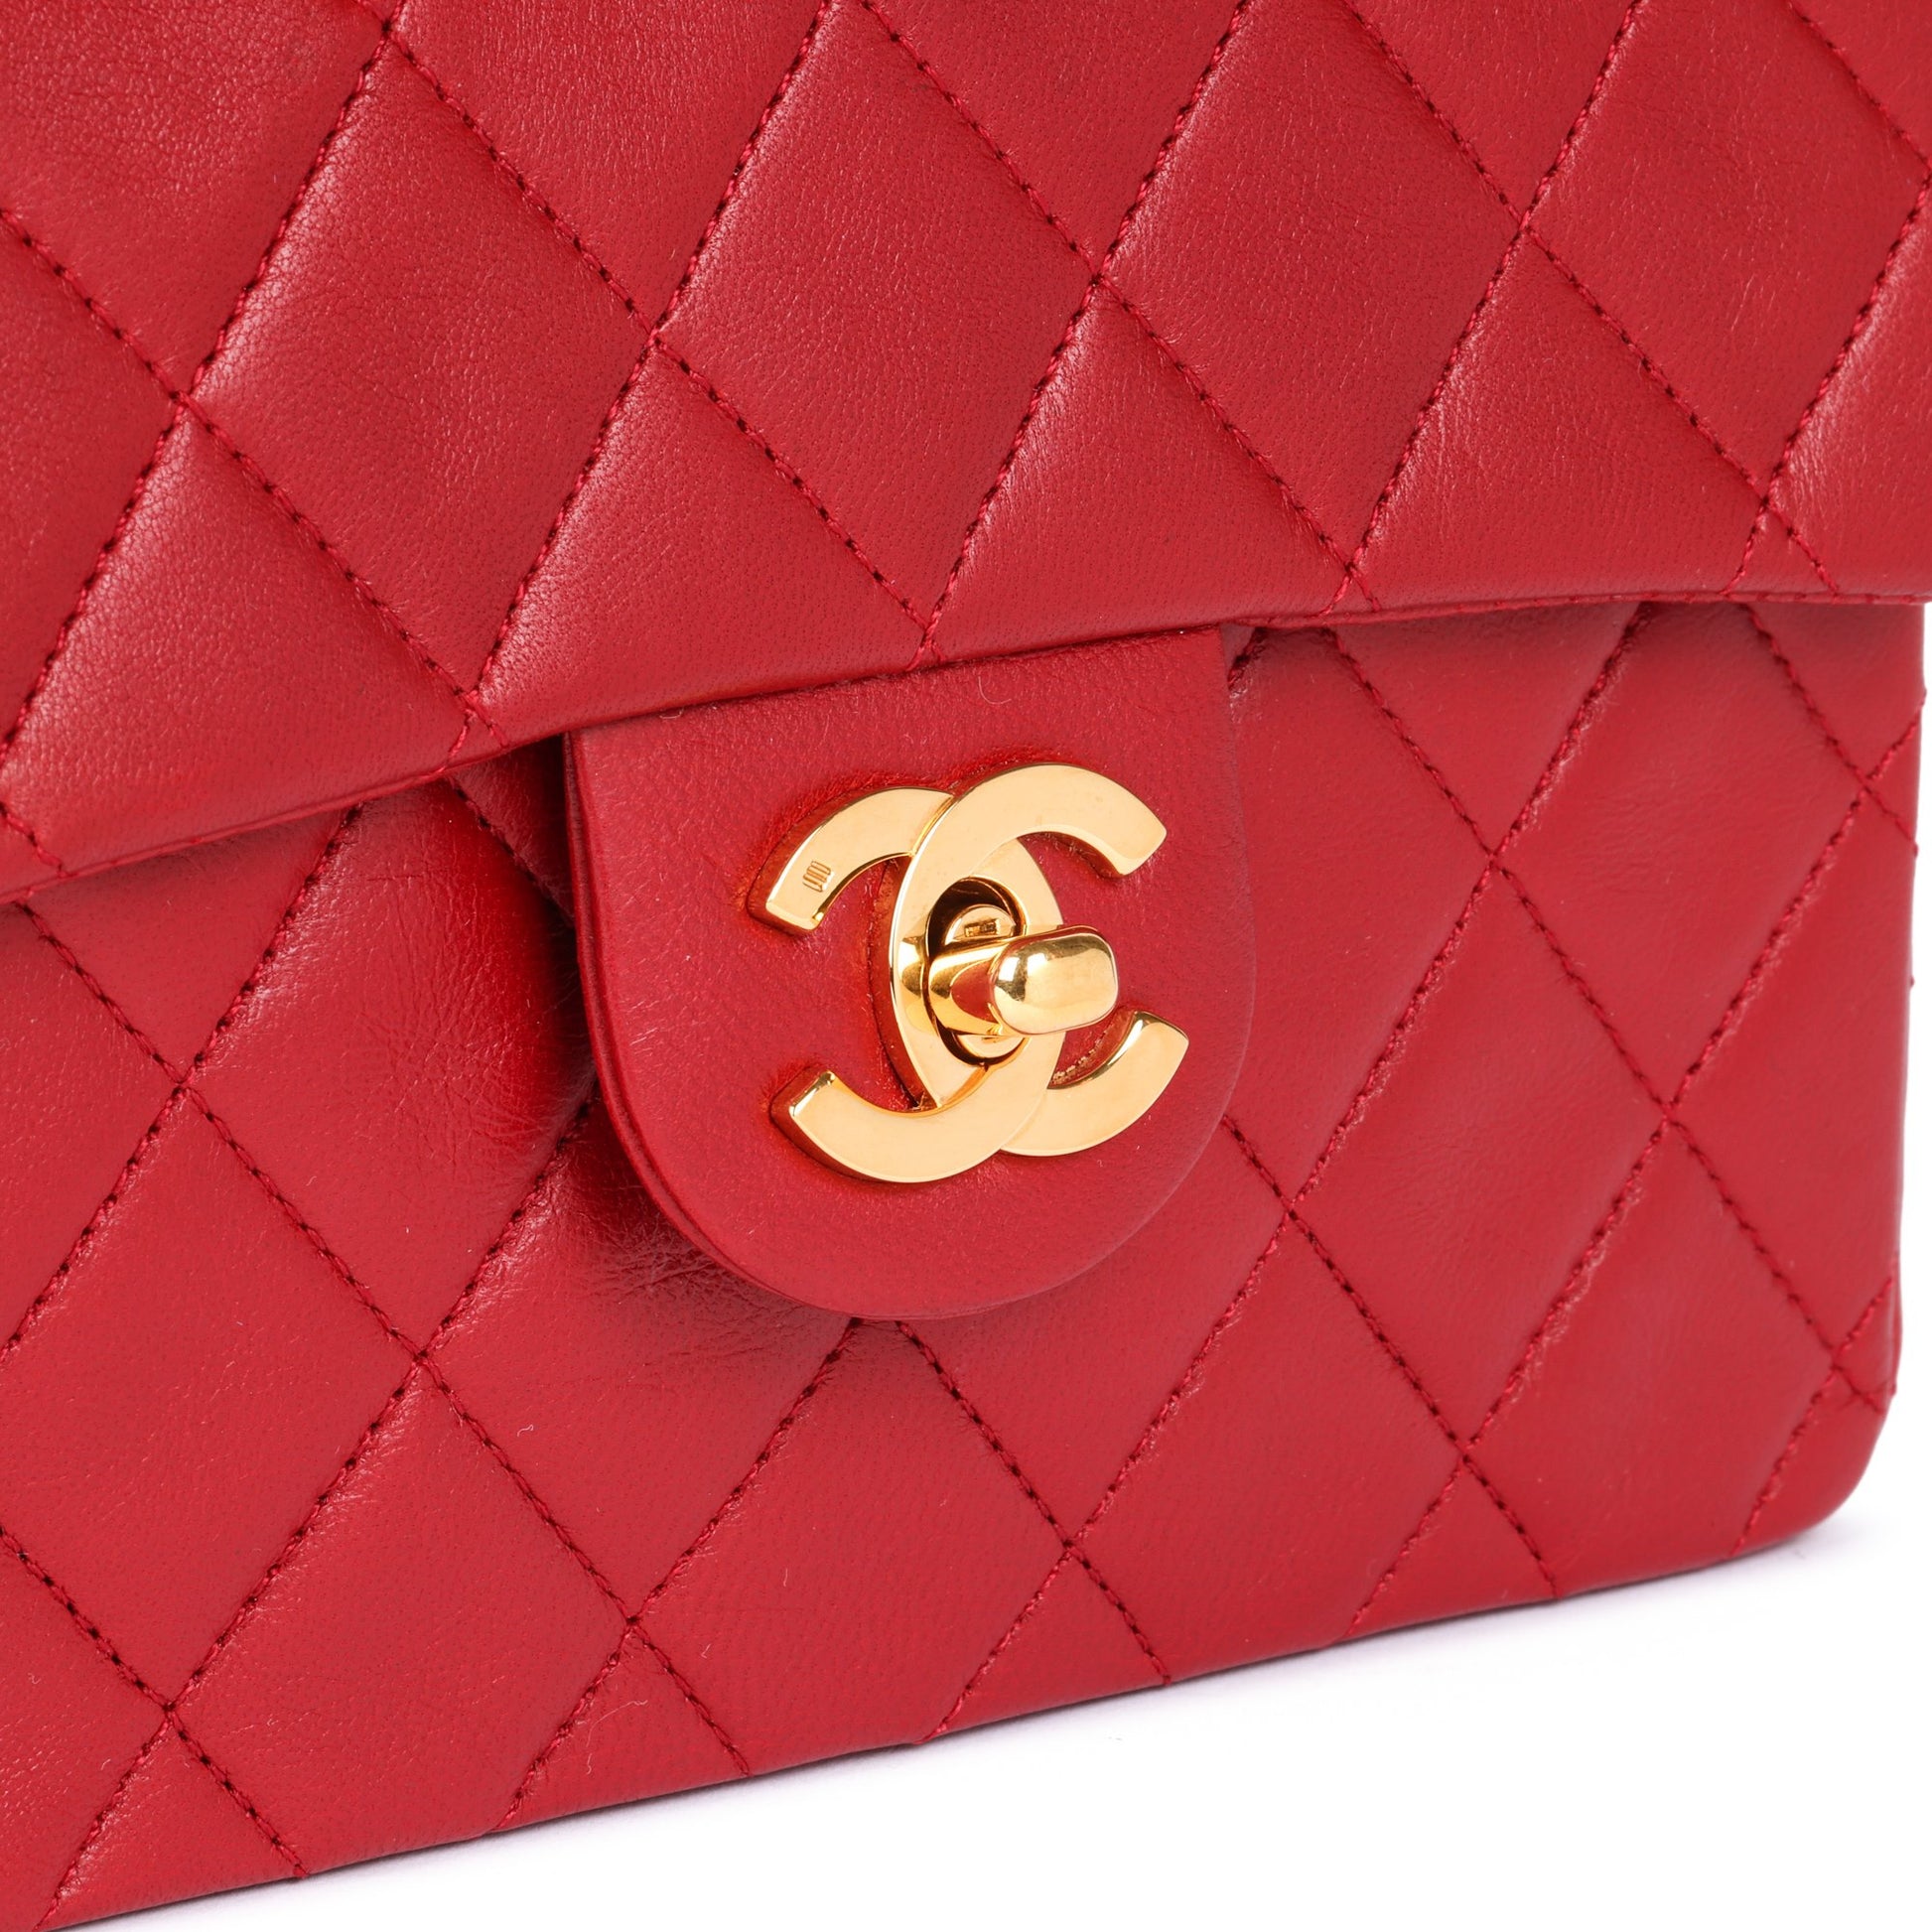 CHANEL, Bags, Chanel Mini Classic Flap Bag Red Lambskin Champagne  Hardware From 22a